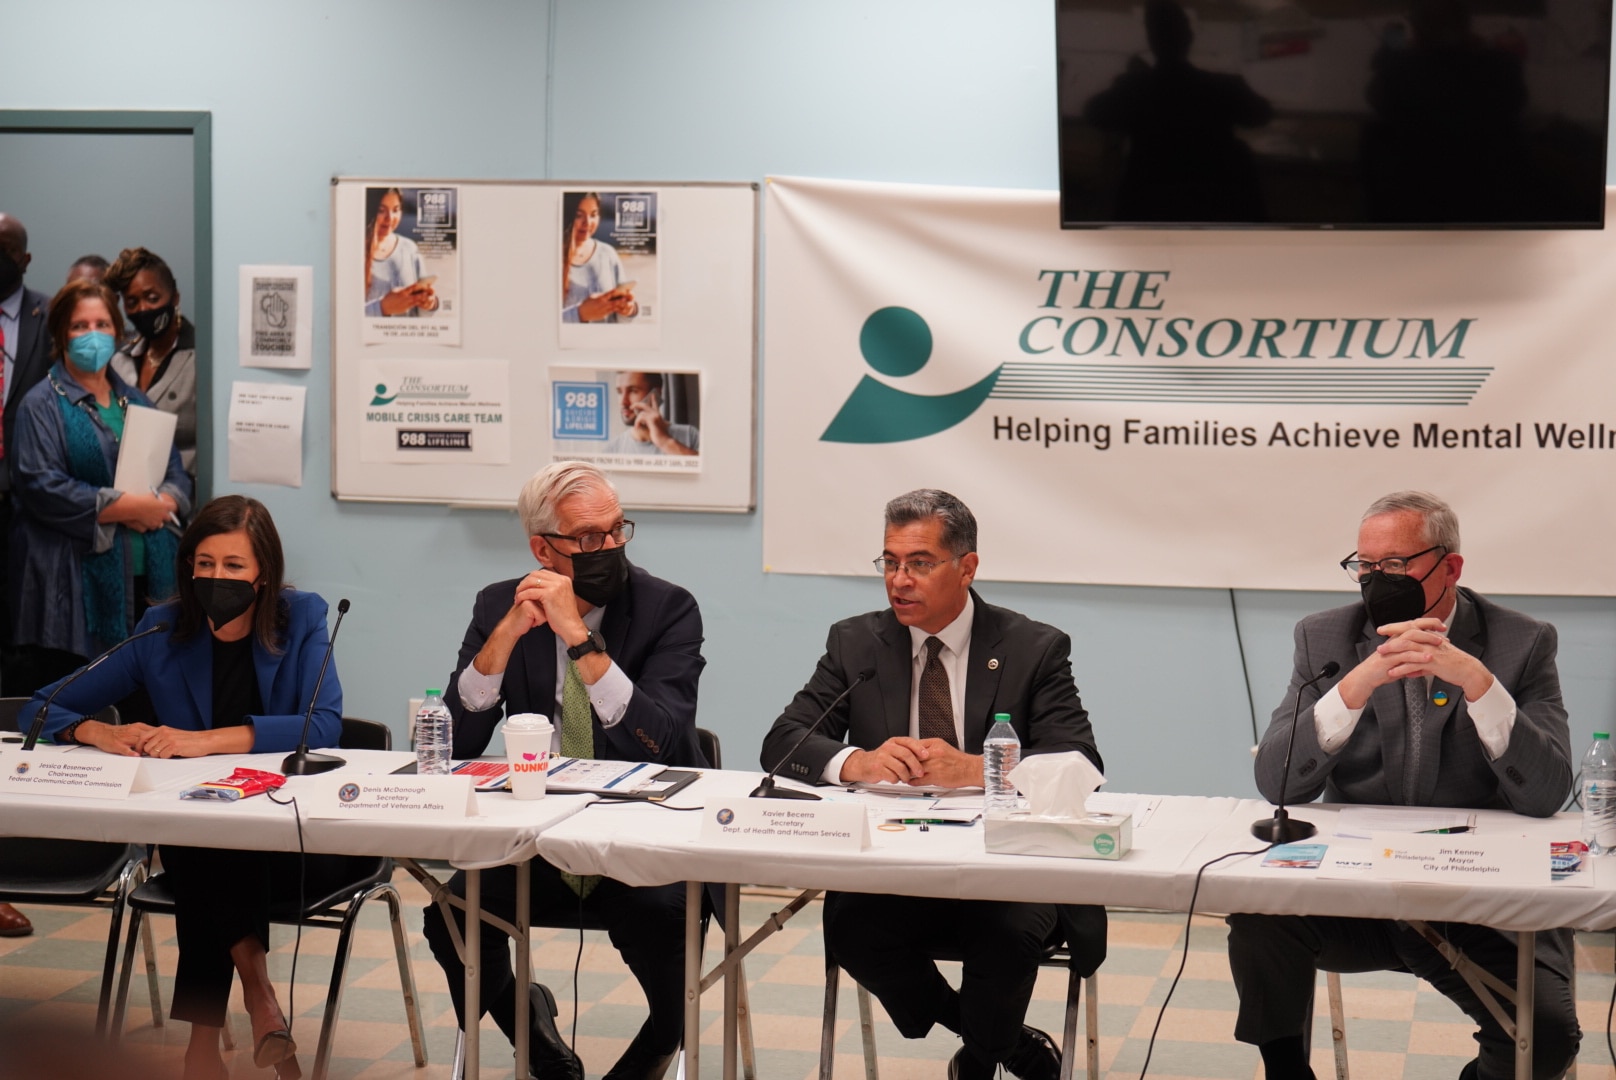 Secretary Becerra speaking with others seated during a roundtable discussion. Banner says The Consortium